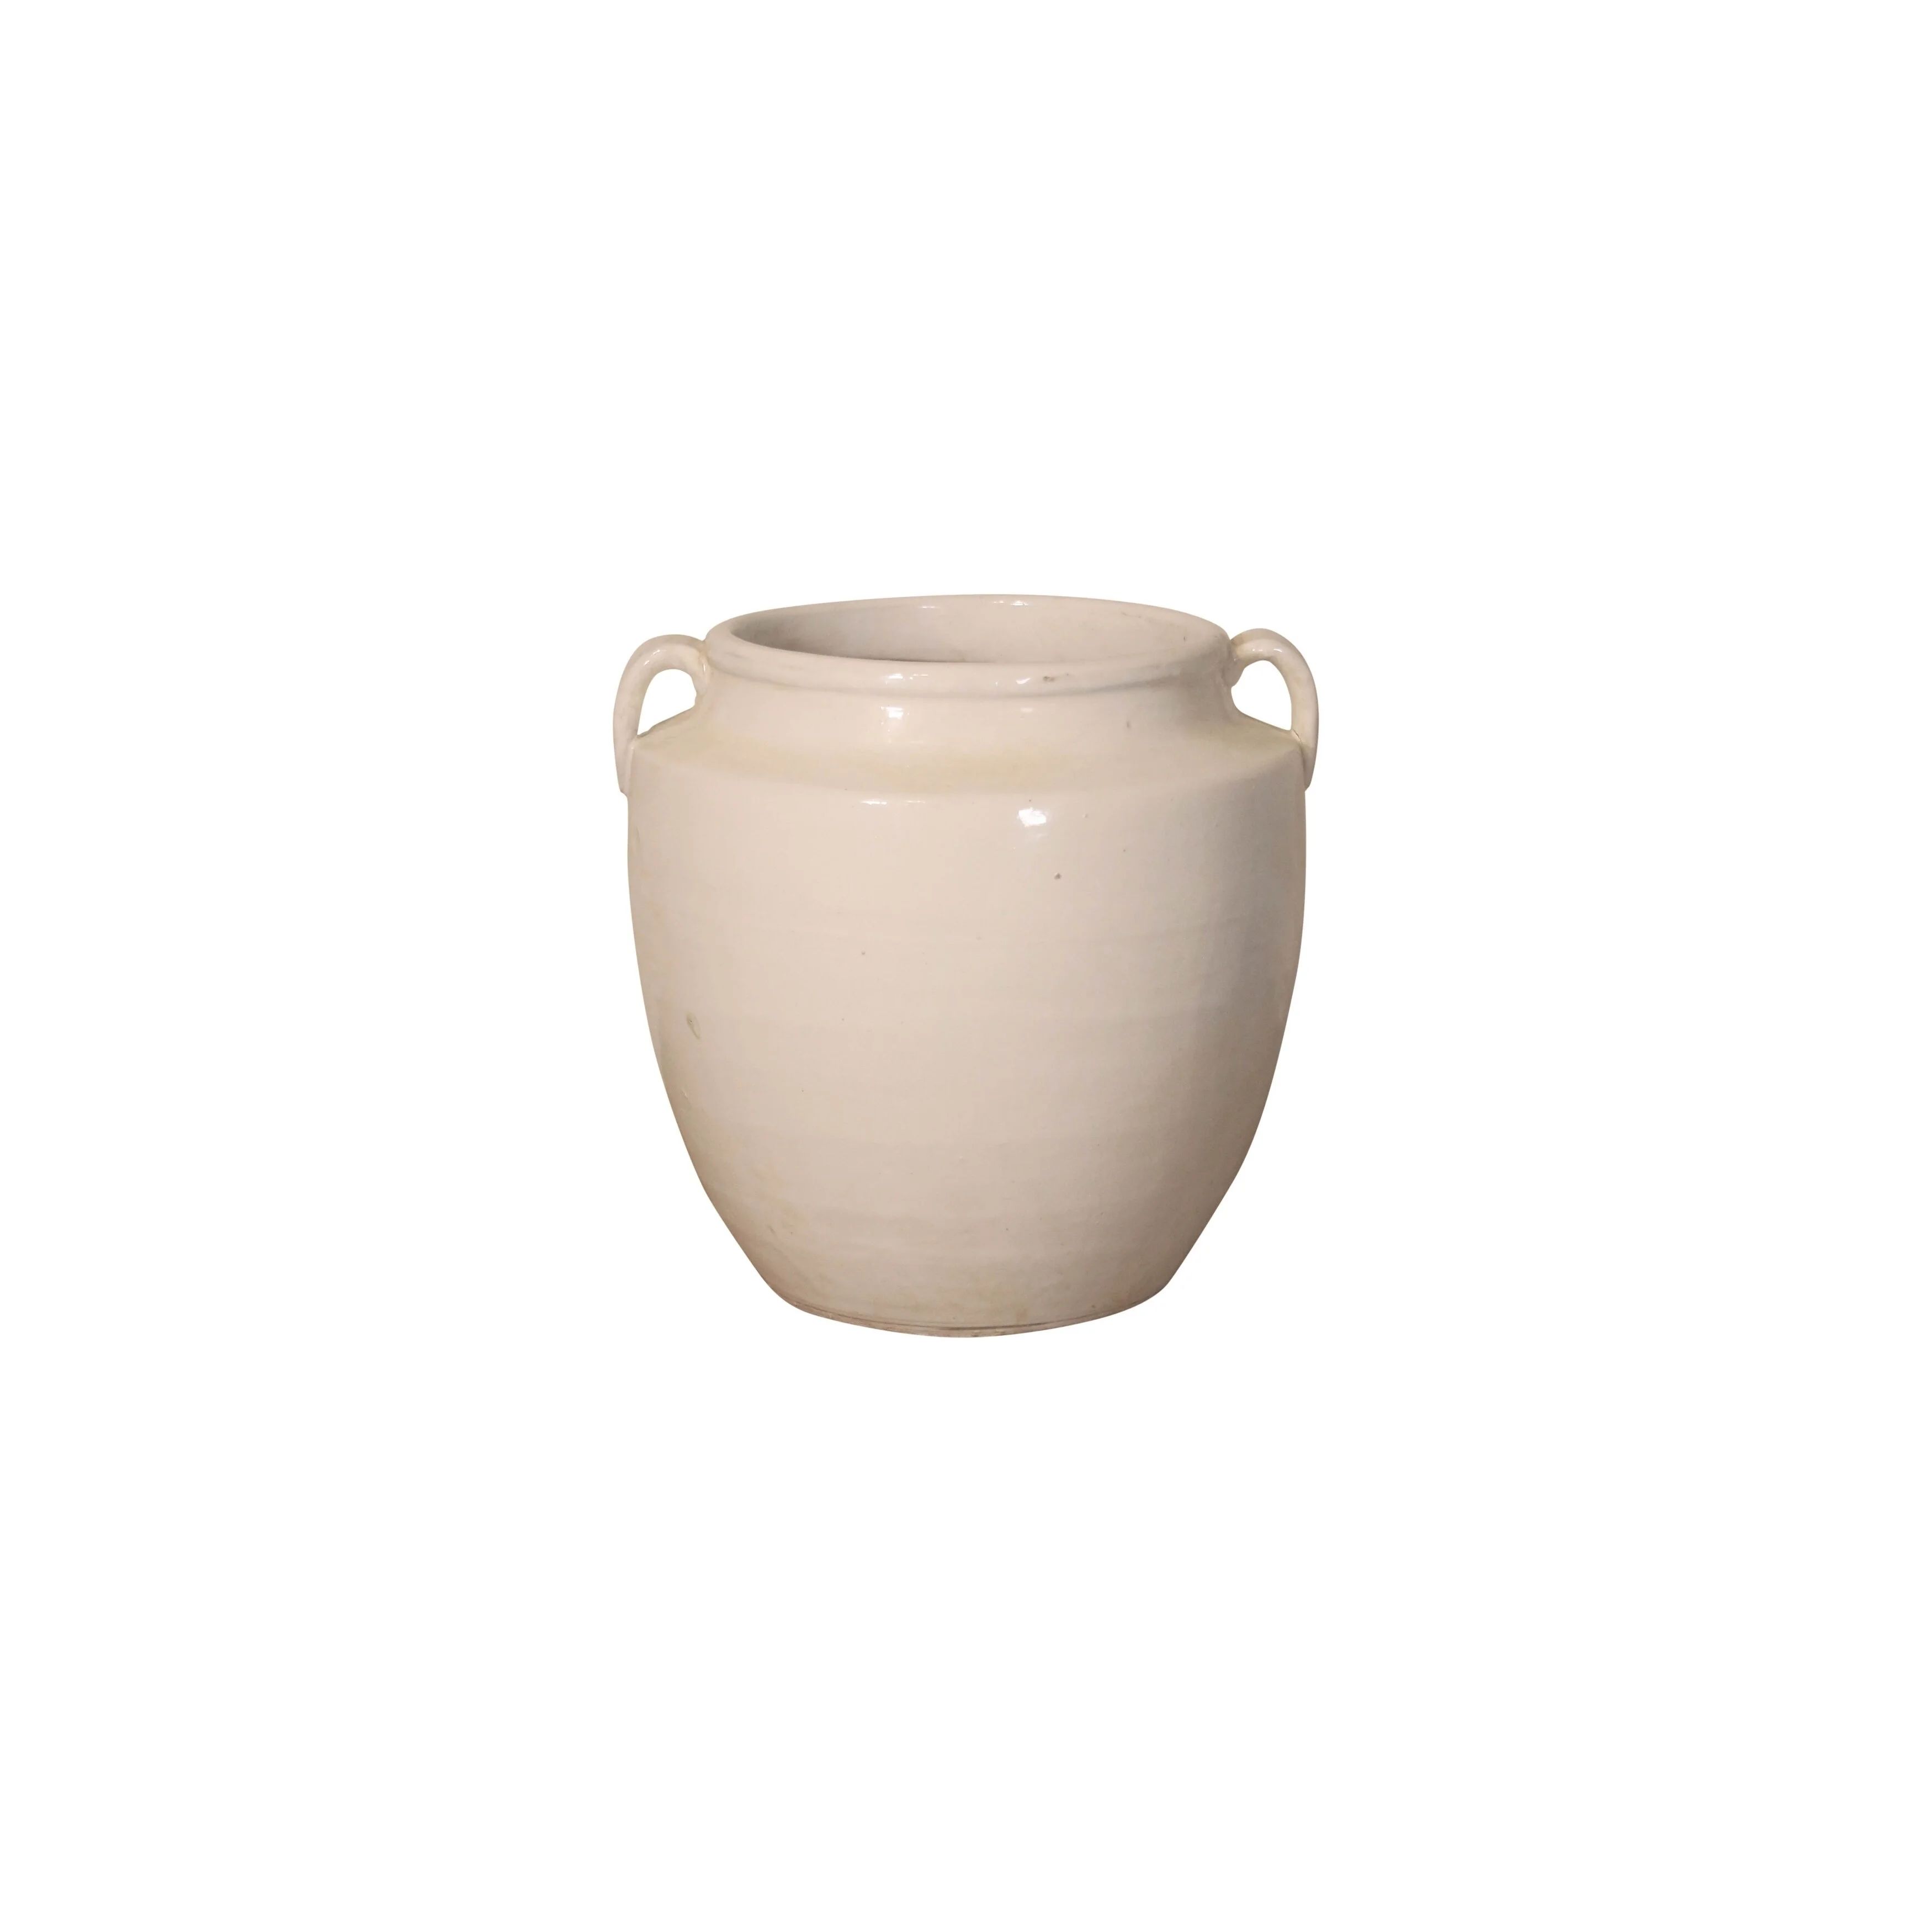 Artissance  Creamy White Pot with Two Handles, 10 Inch Tall | Walmart (US)